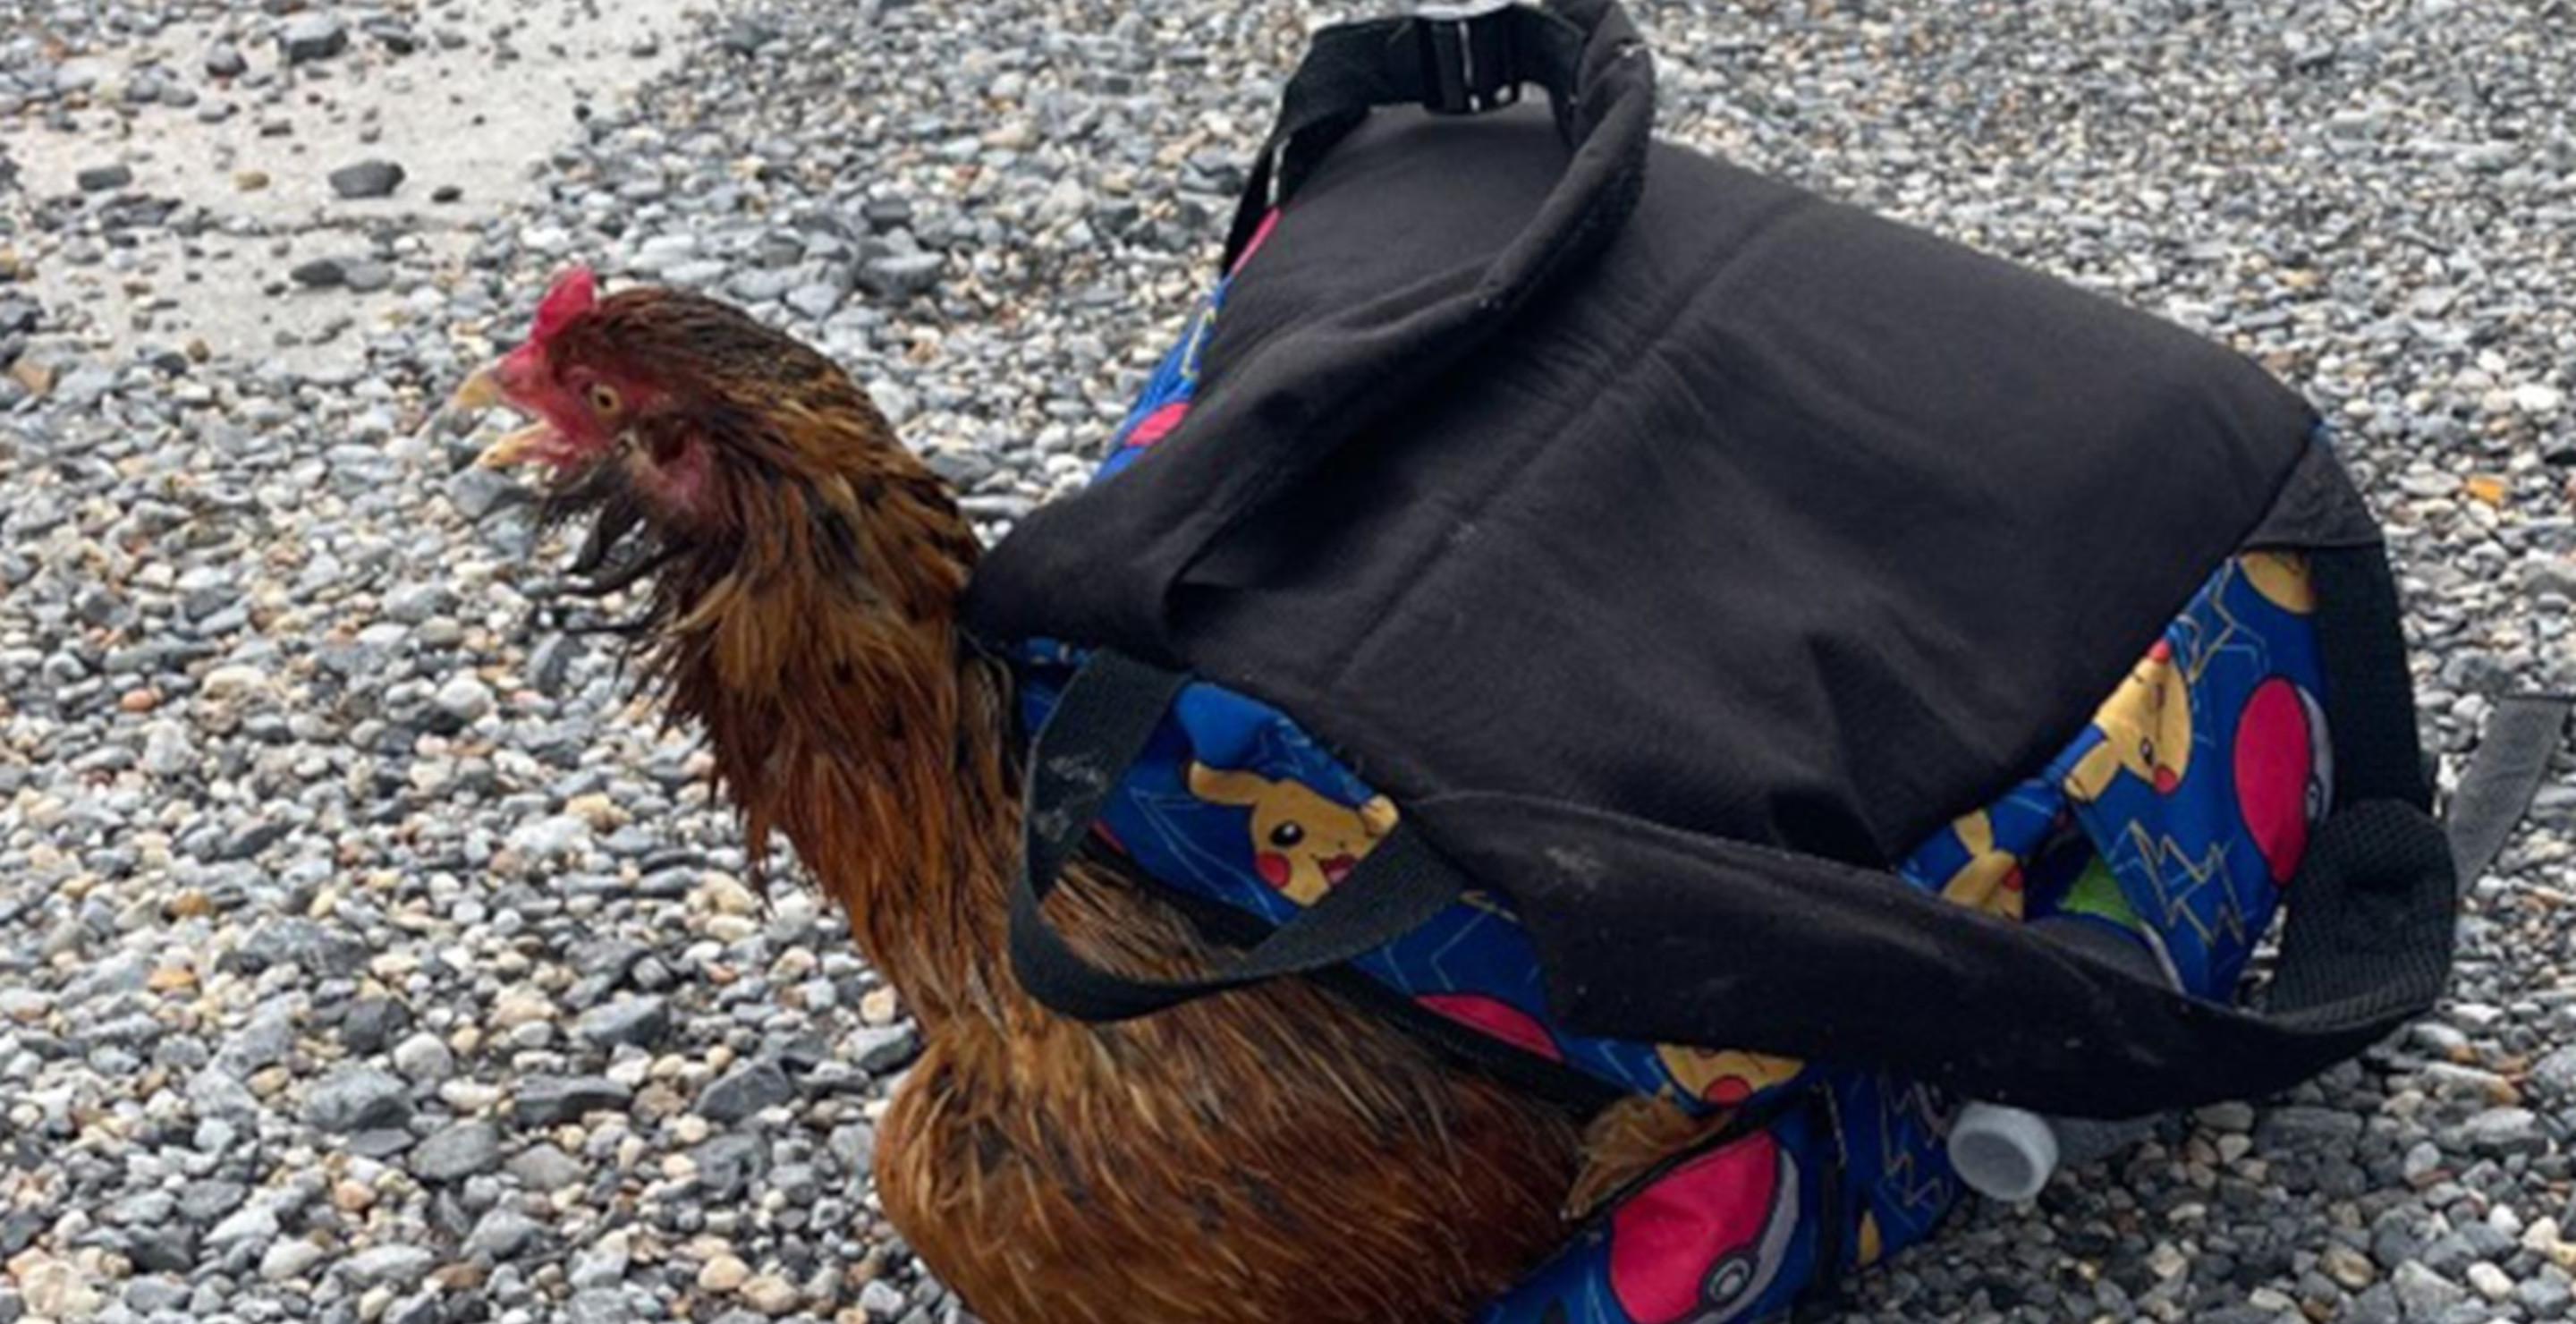 Authorities Bizarrely Discover Rooster In Backpack of Missing Child